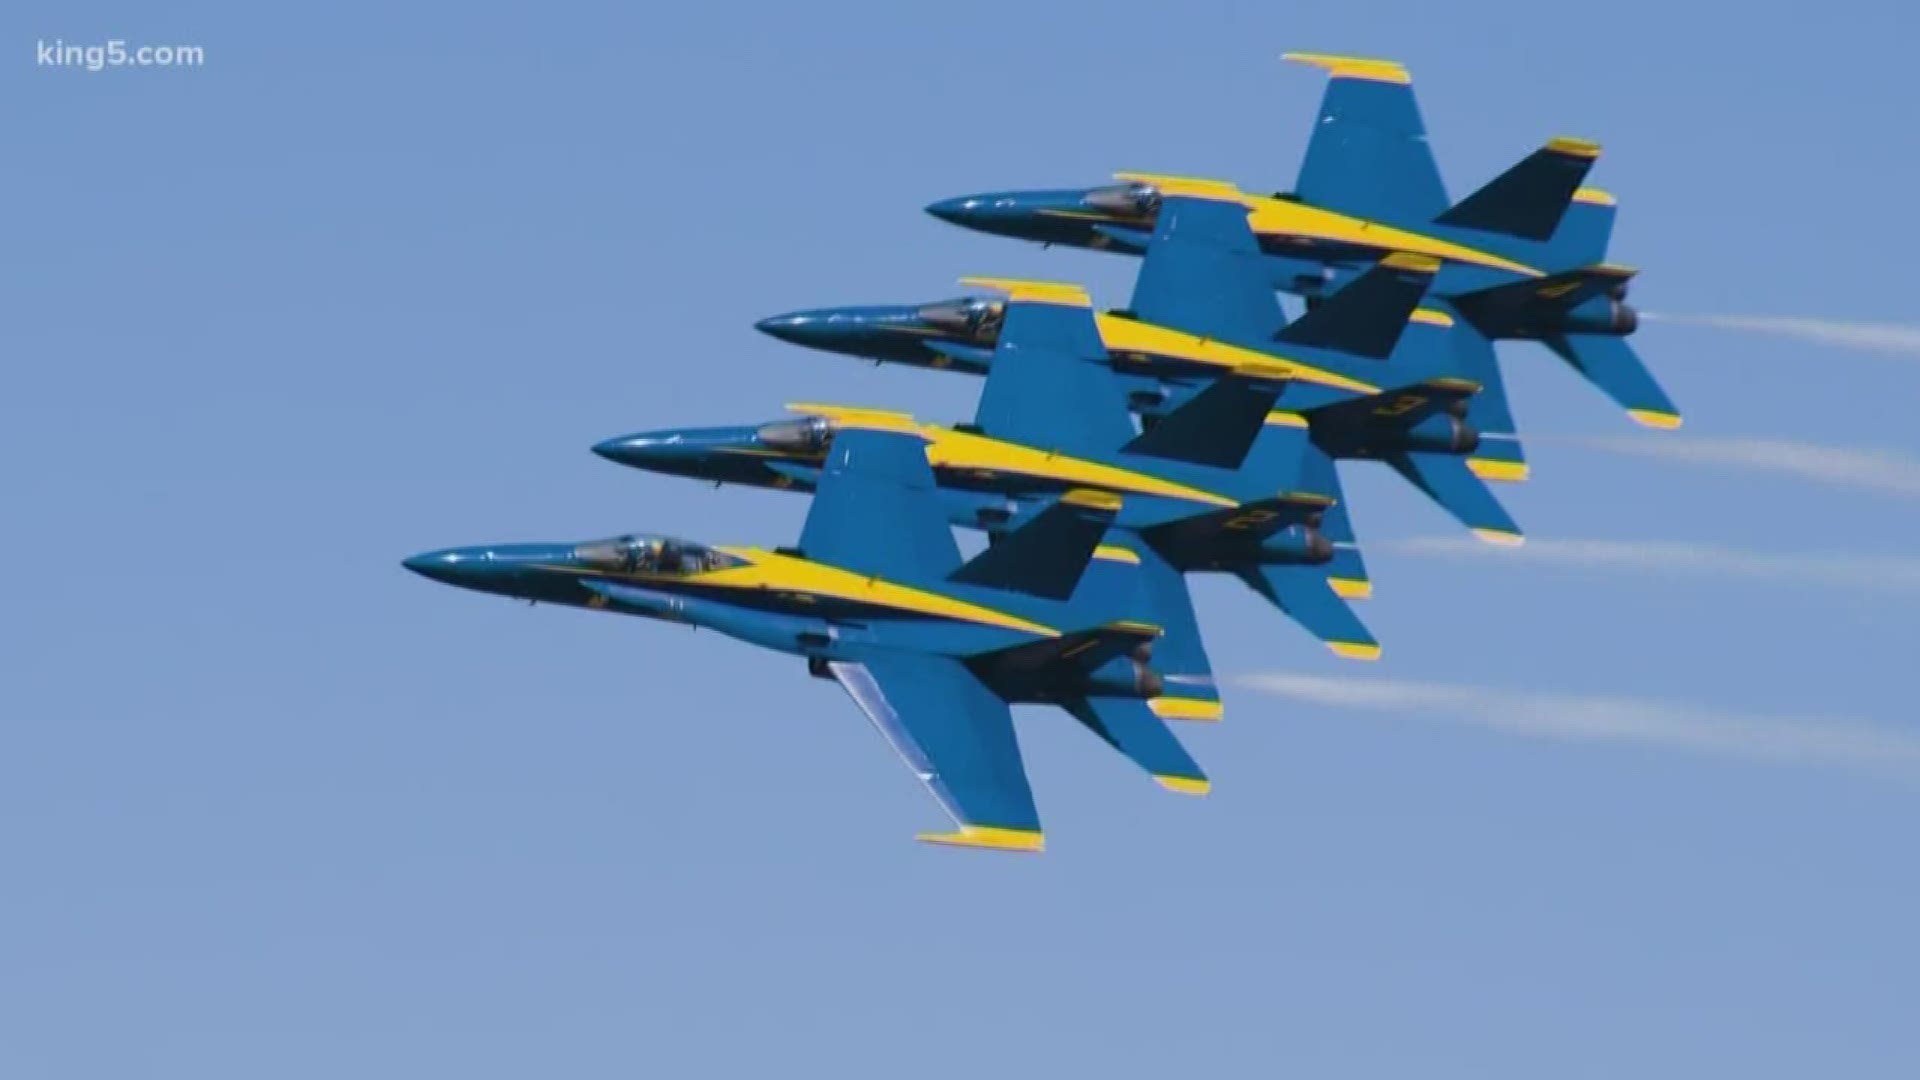 The elite pilots are in town to celebrate the 70th anniversary of Seafair in Seattle.